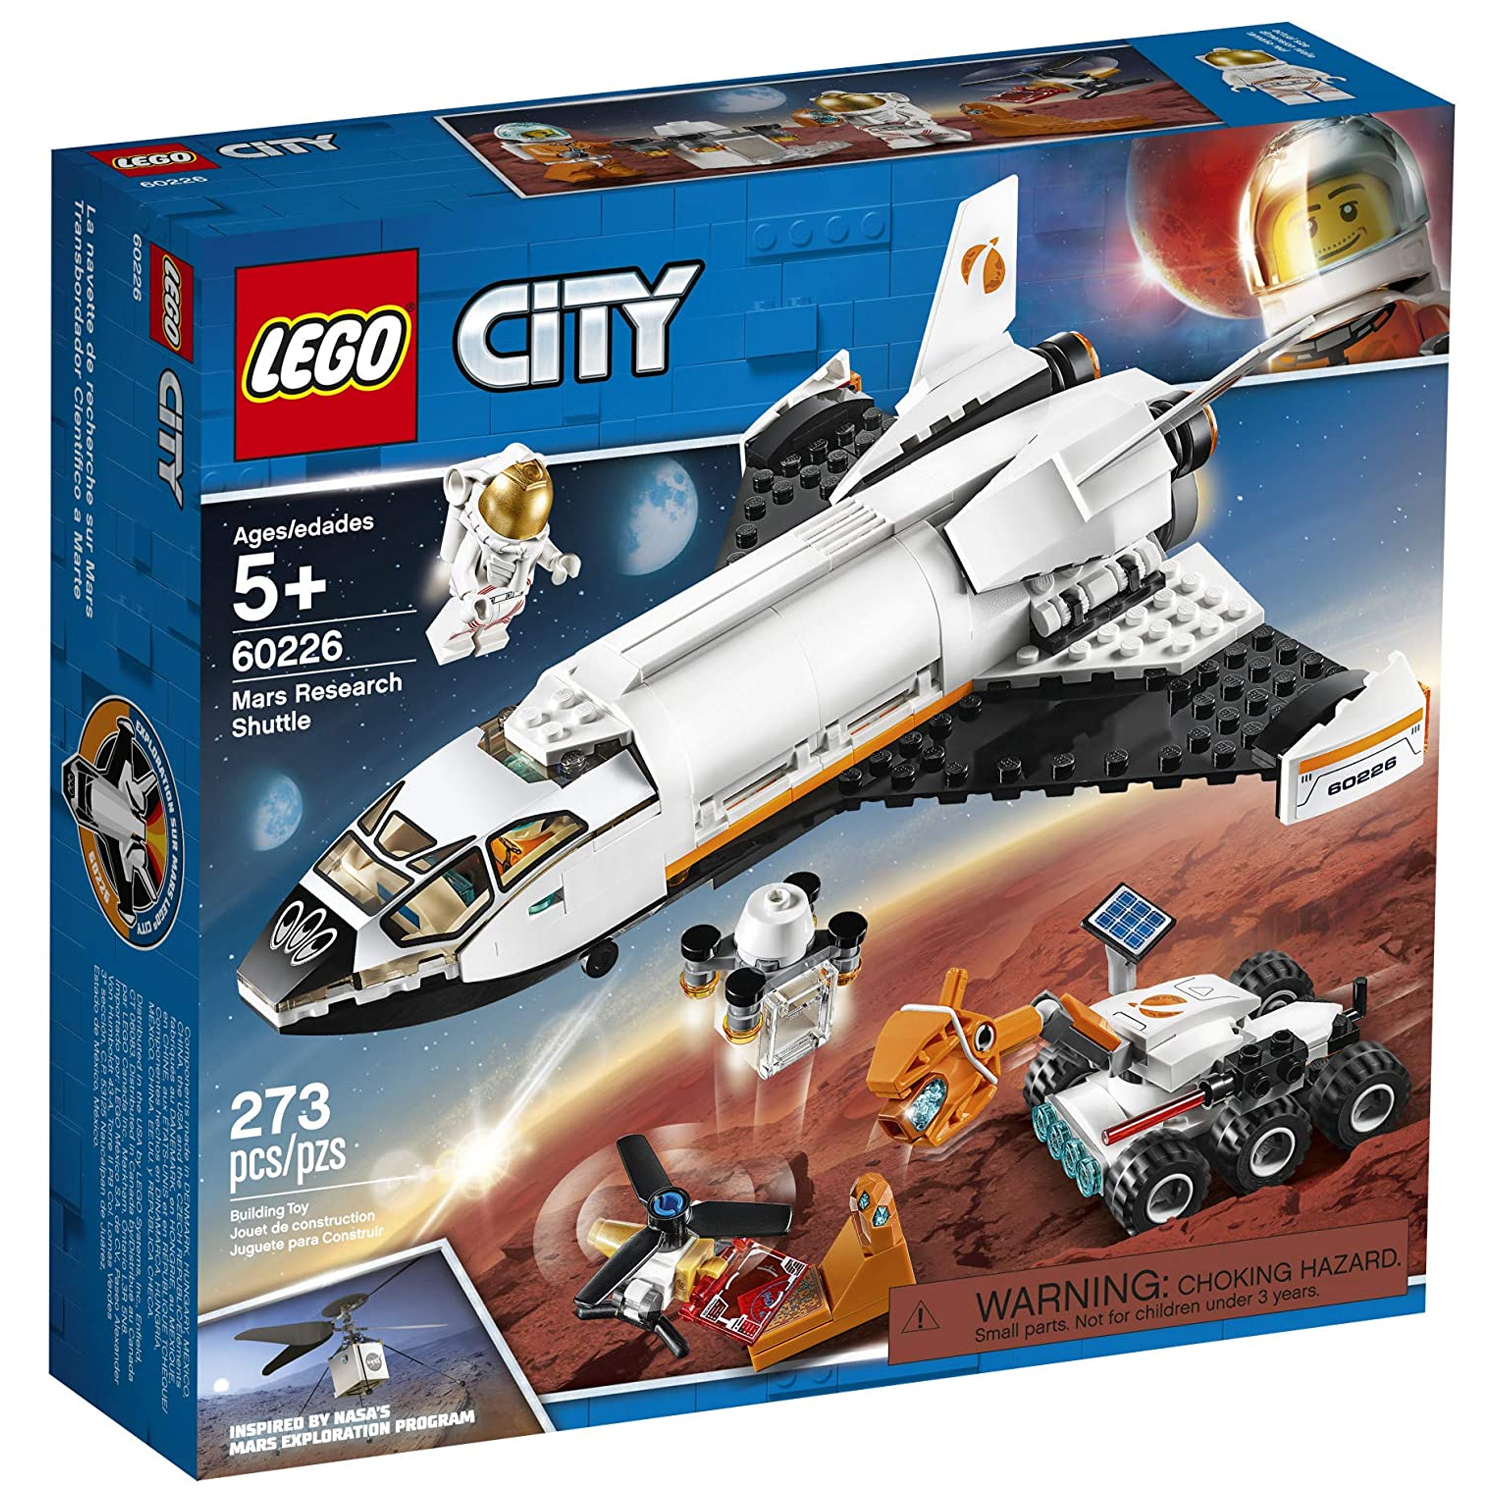 LEGO City 60226 Mars Research Space Shuttle NASA Playset with 2 Astronauts - image 1 of 3